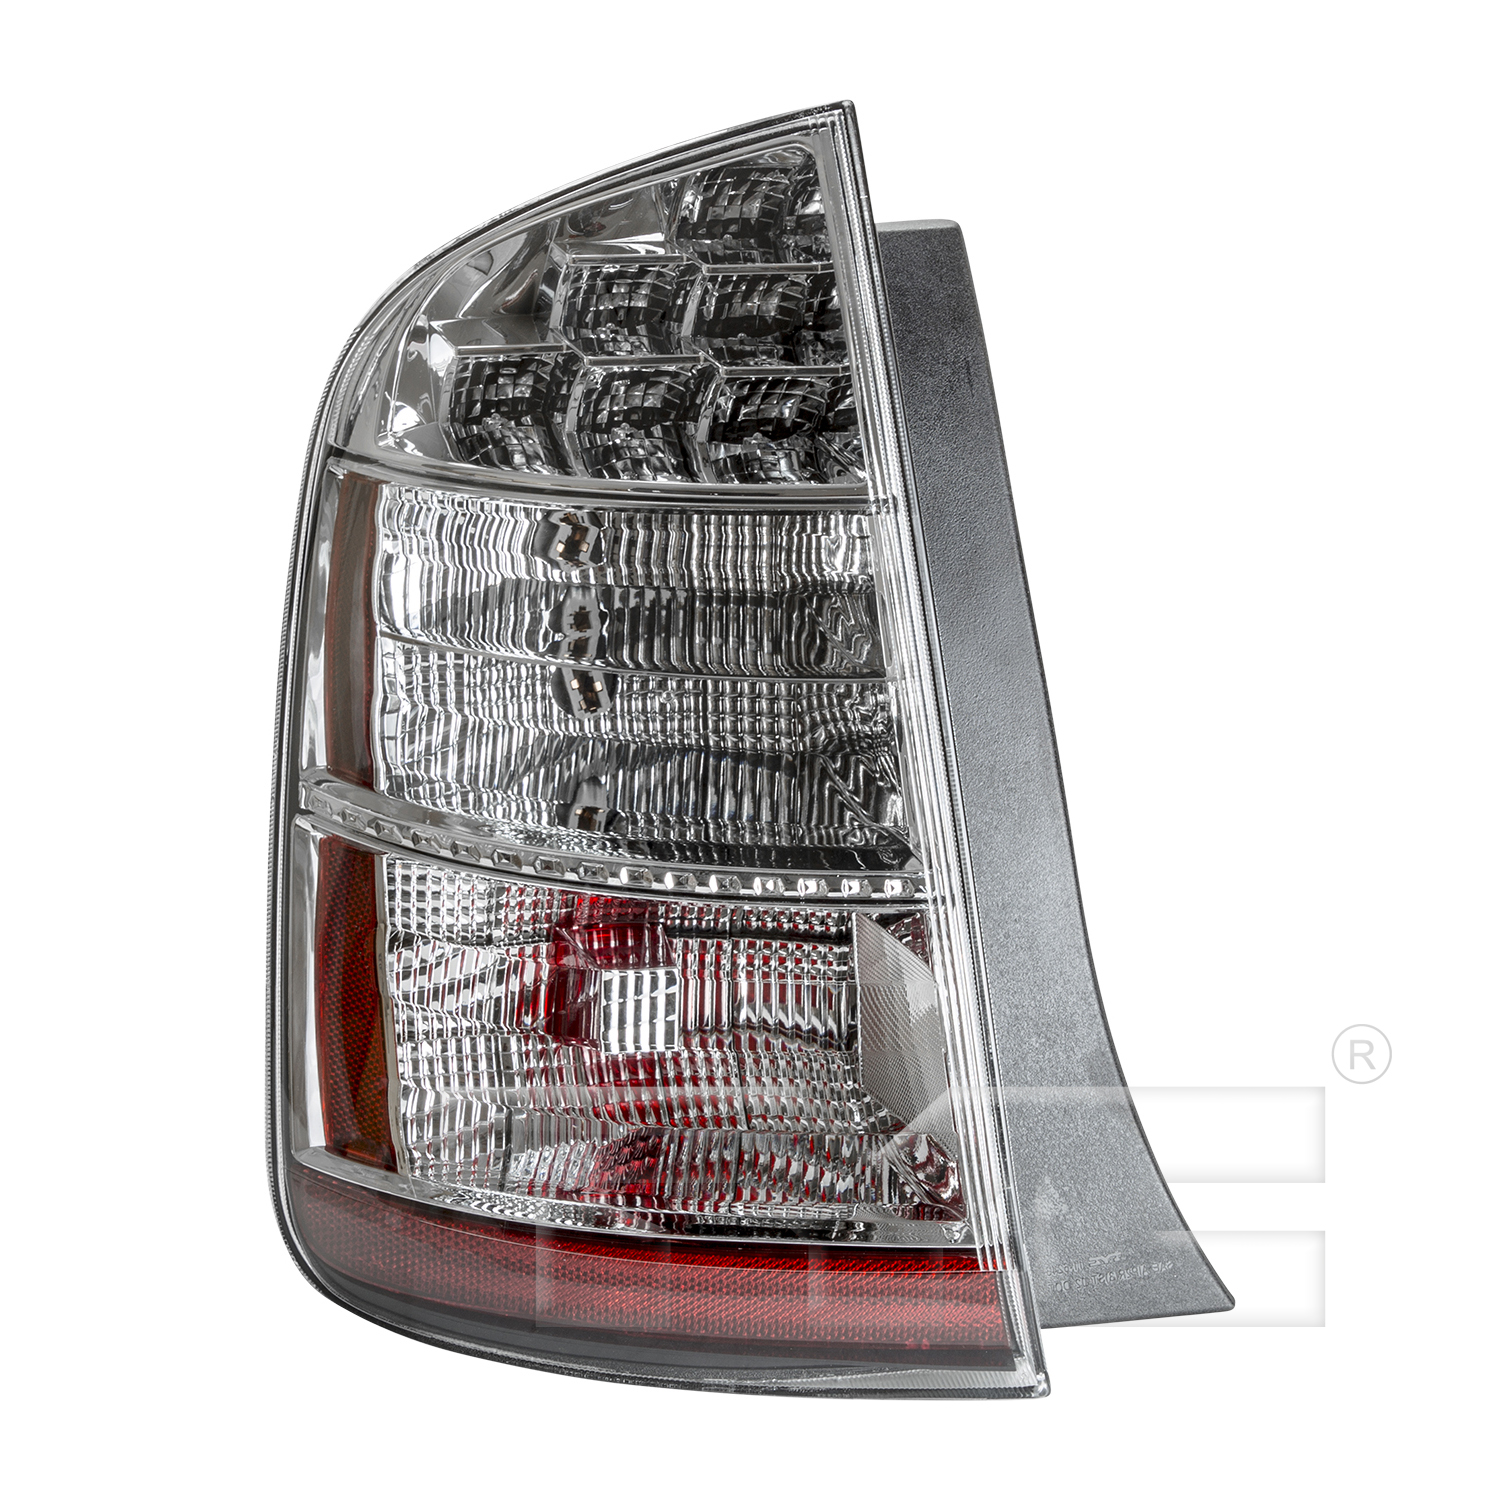 Aftermarket TAILLIGHTS for TOYOTA - PRIUS, PRIUS,06-09,LT Taillamp lens/housing